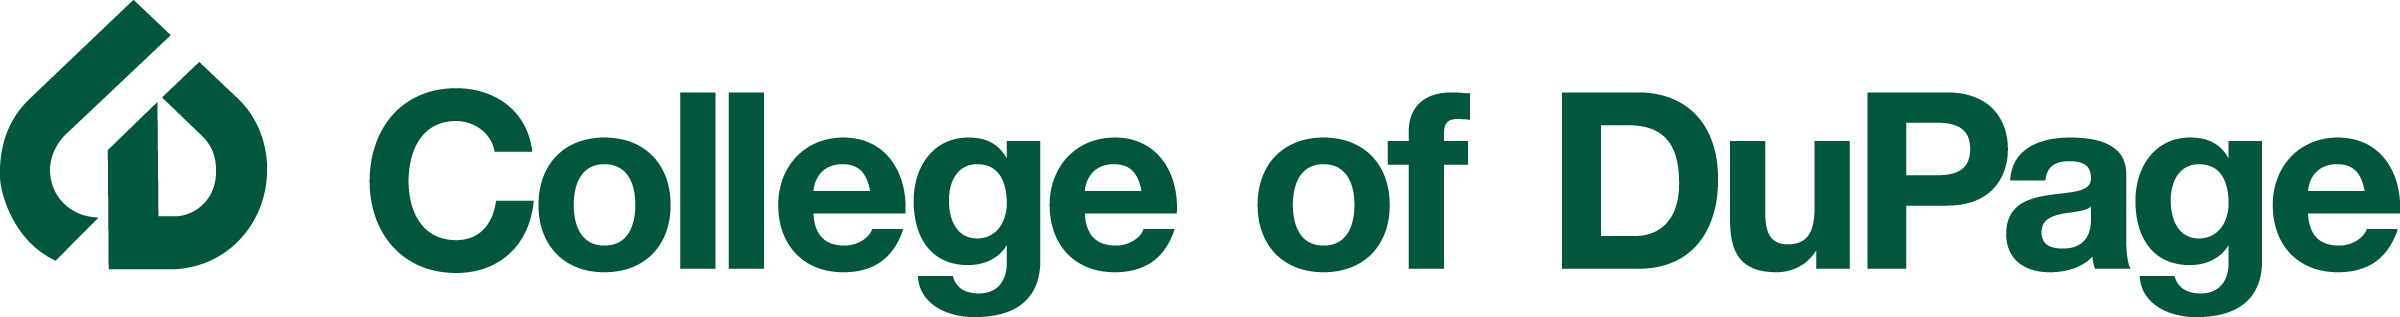 College of DuPage icon and logotype